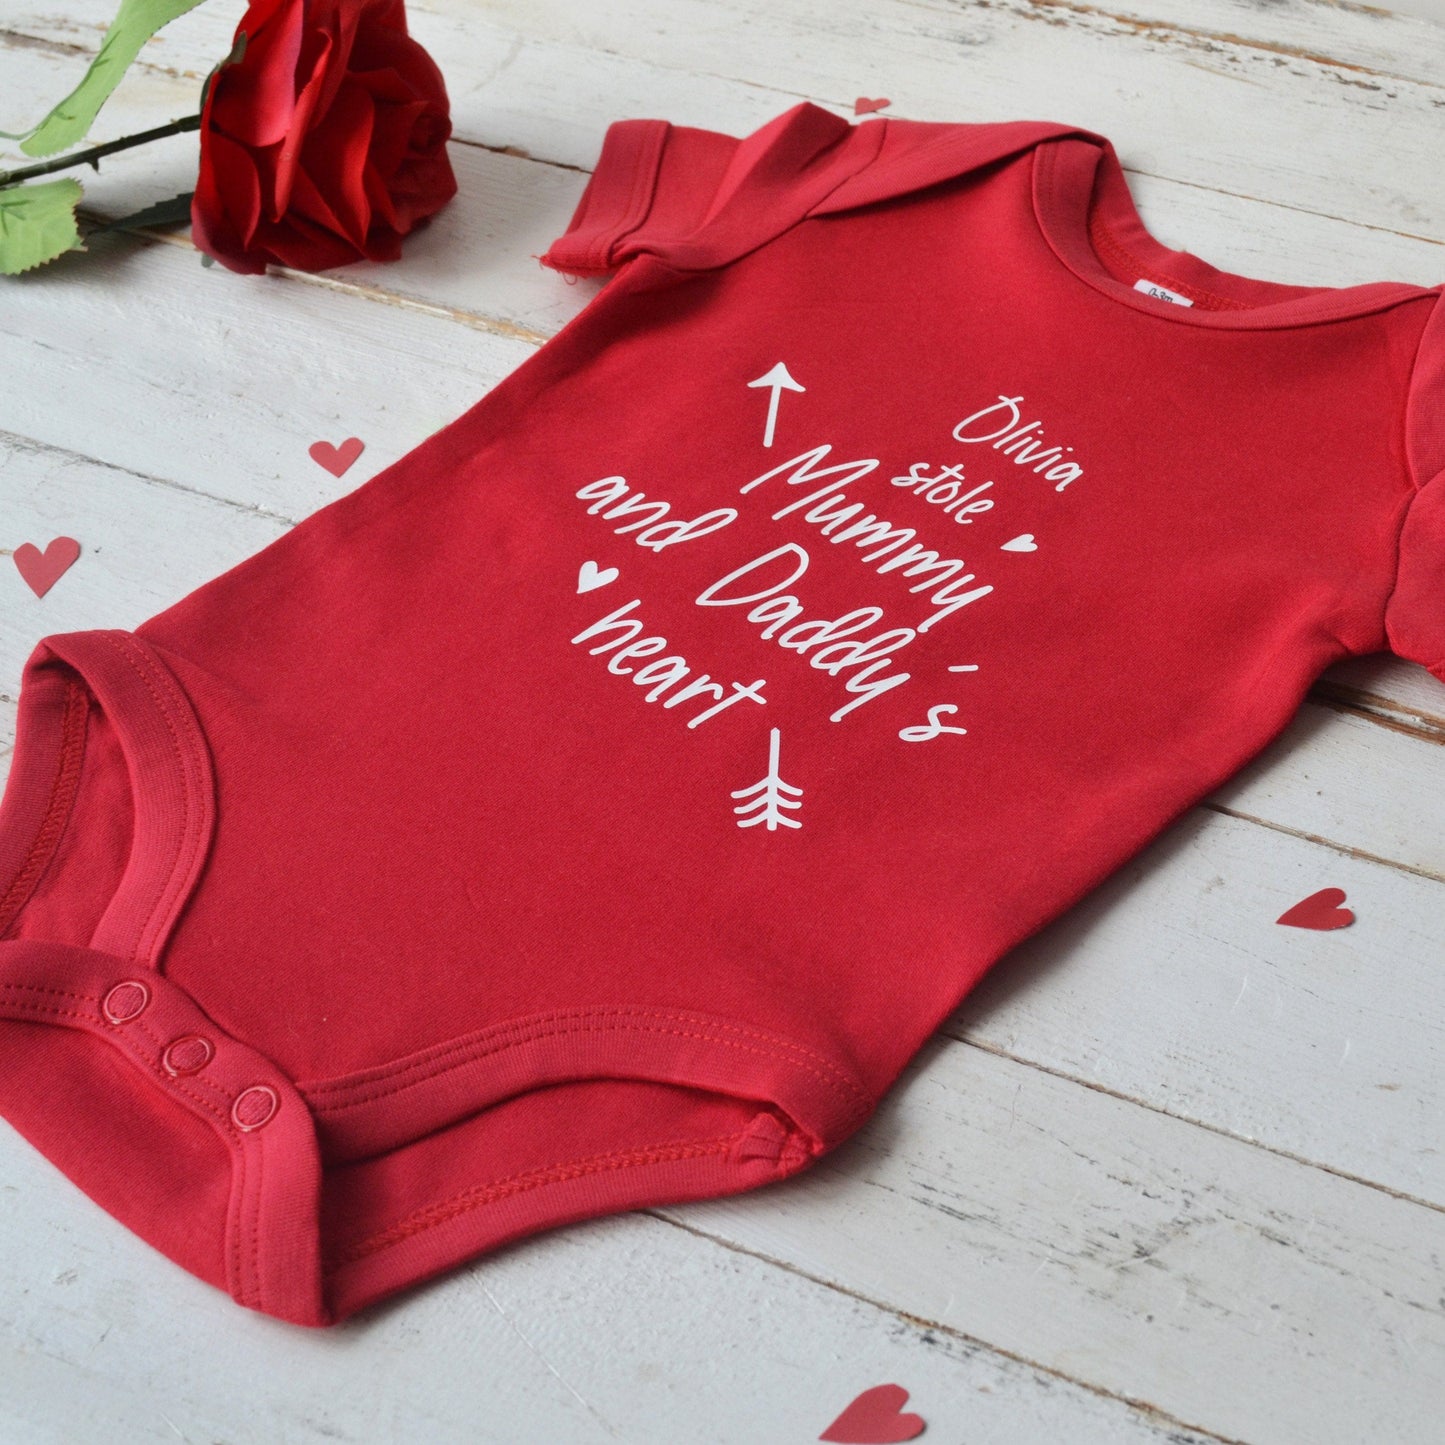 Personalised Valentine's Heart Baby Grow